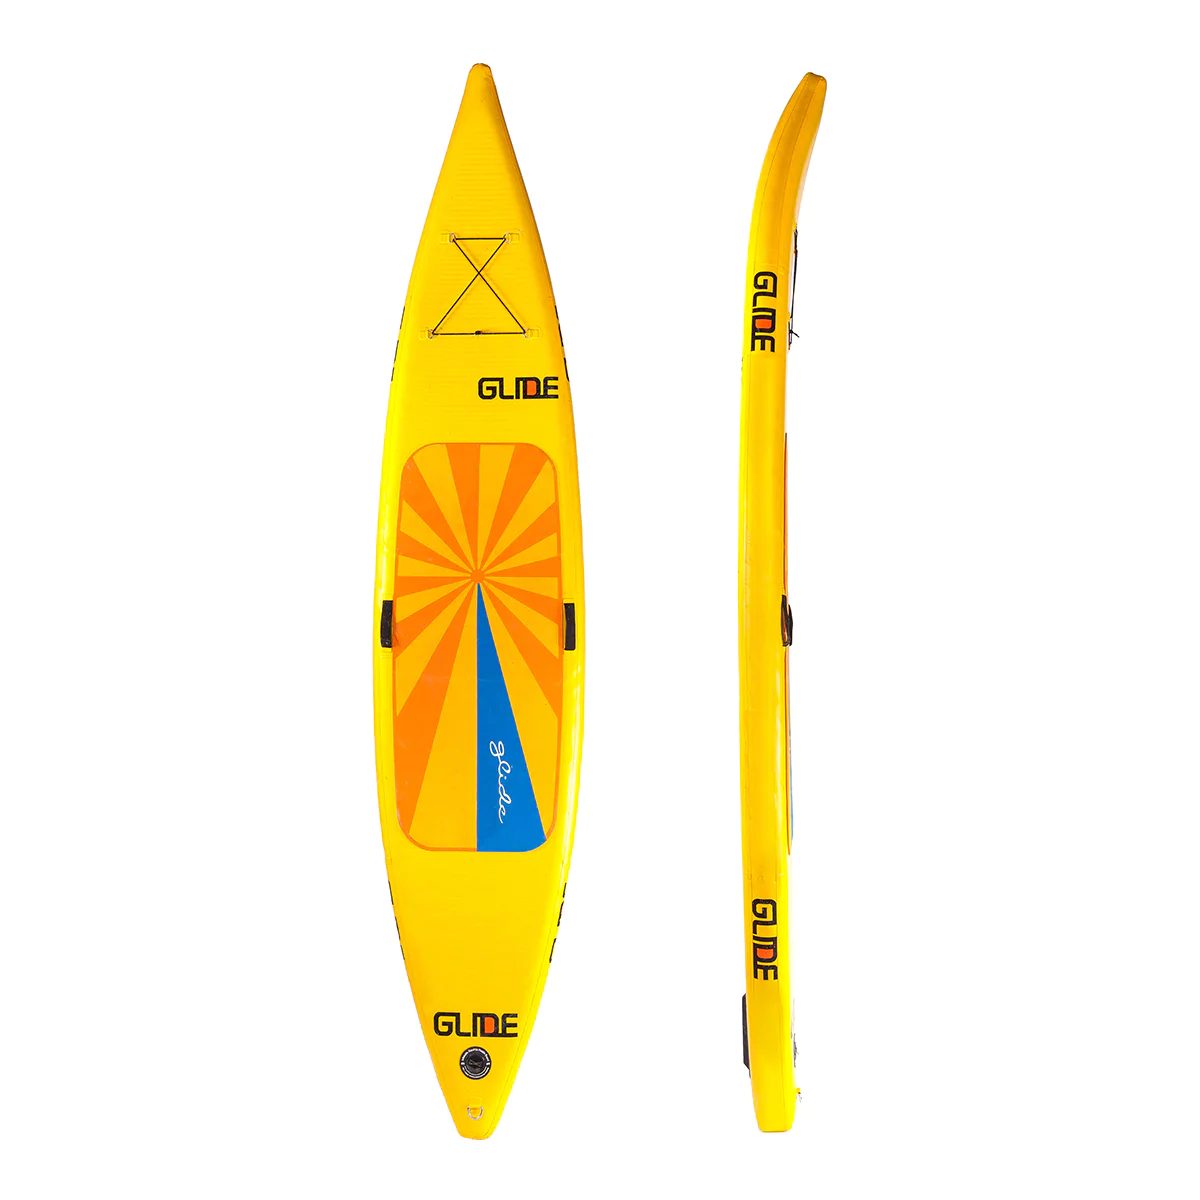 Glide 02 Quest voted best inflatable paddle board. Quest best inflatable stand up paddle board, bst inflatable sups for touring.